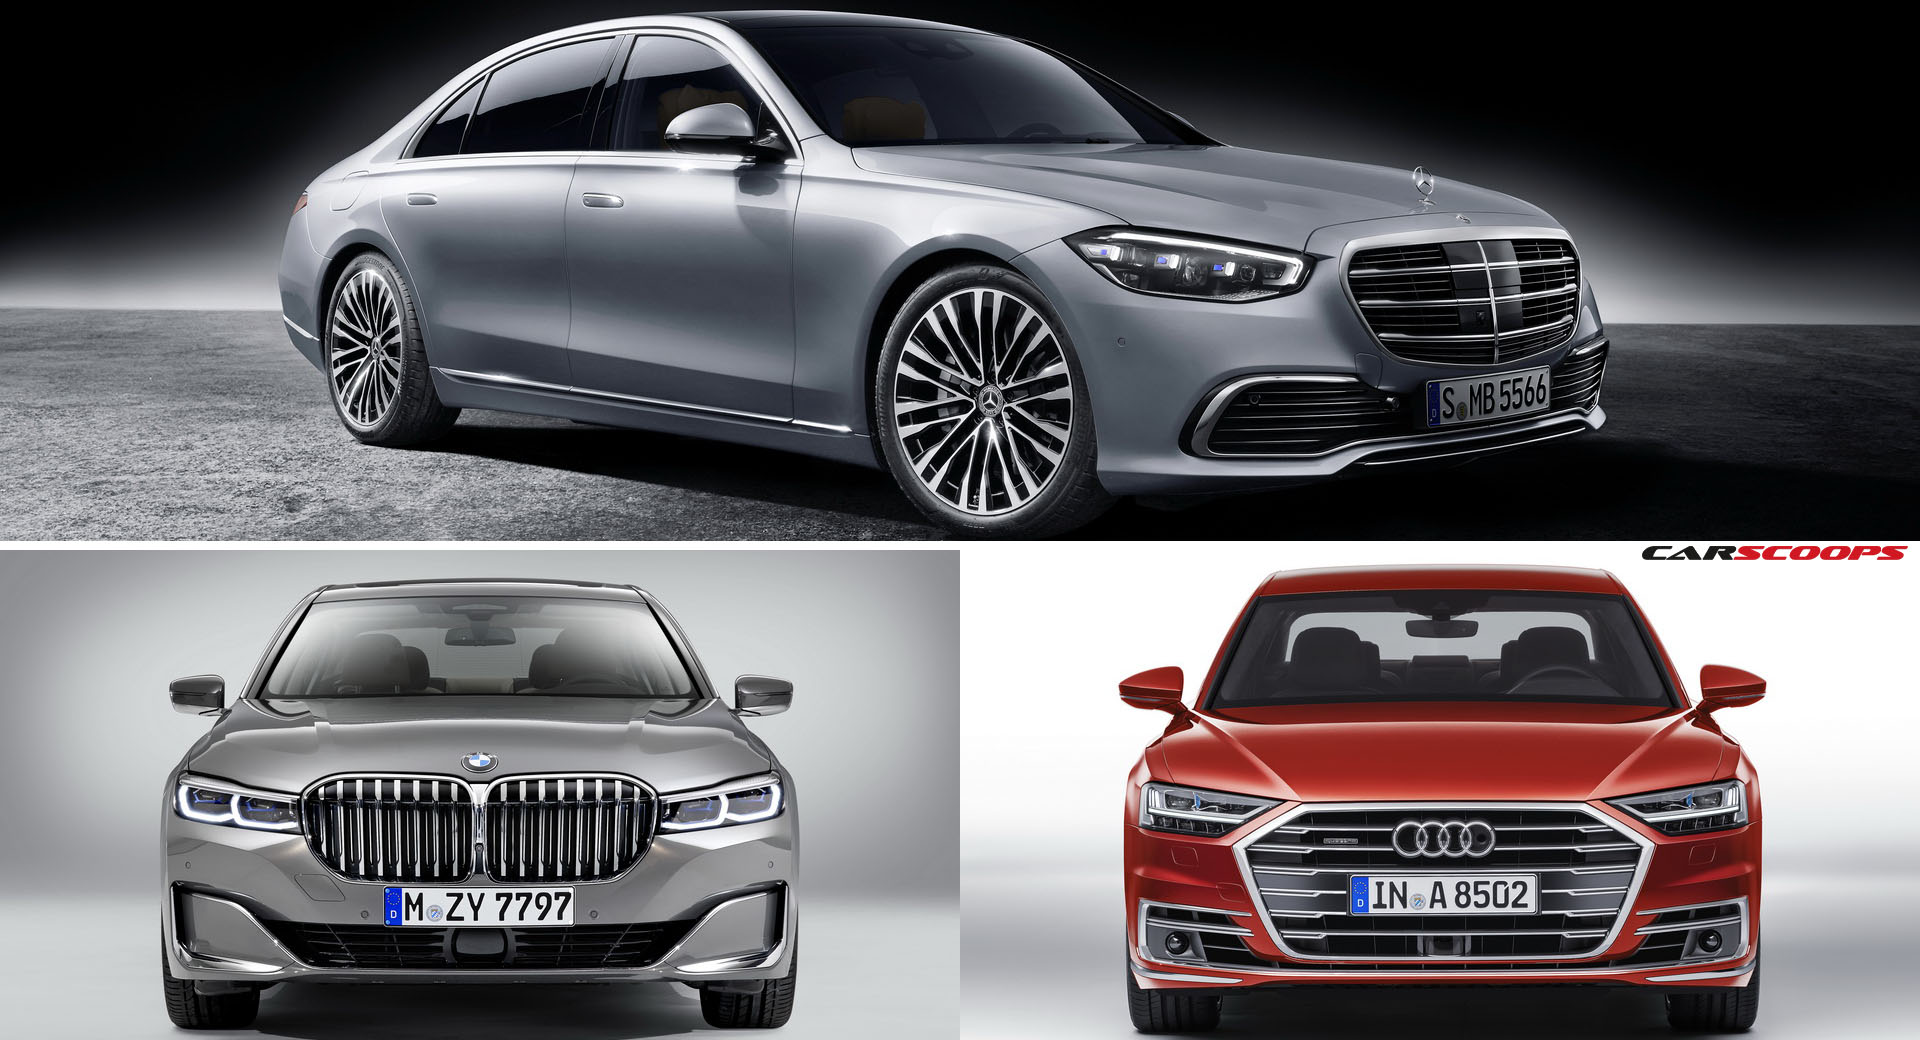 21 Mercedes S Class Vs Bmw 7 Series Vs Audi A8 Which German Flagship Saloon Gets Your Vote Carscoops